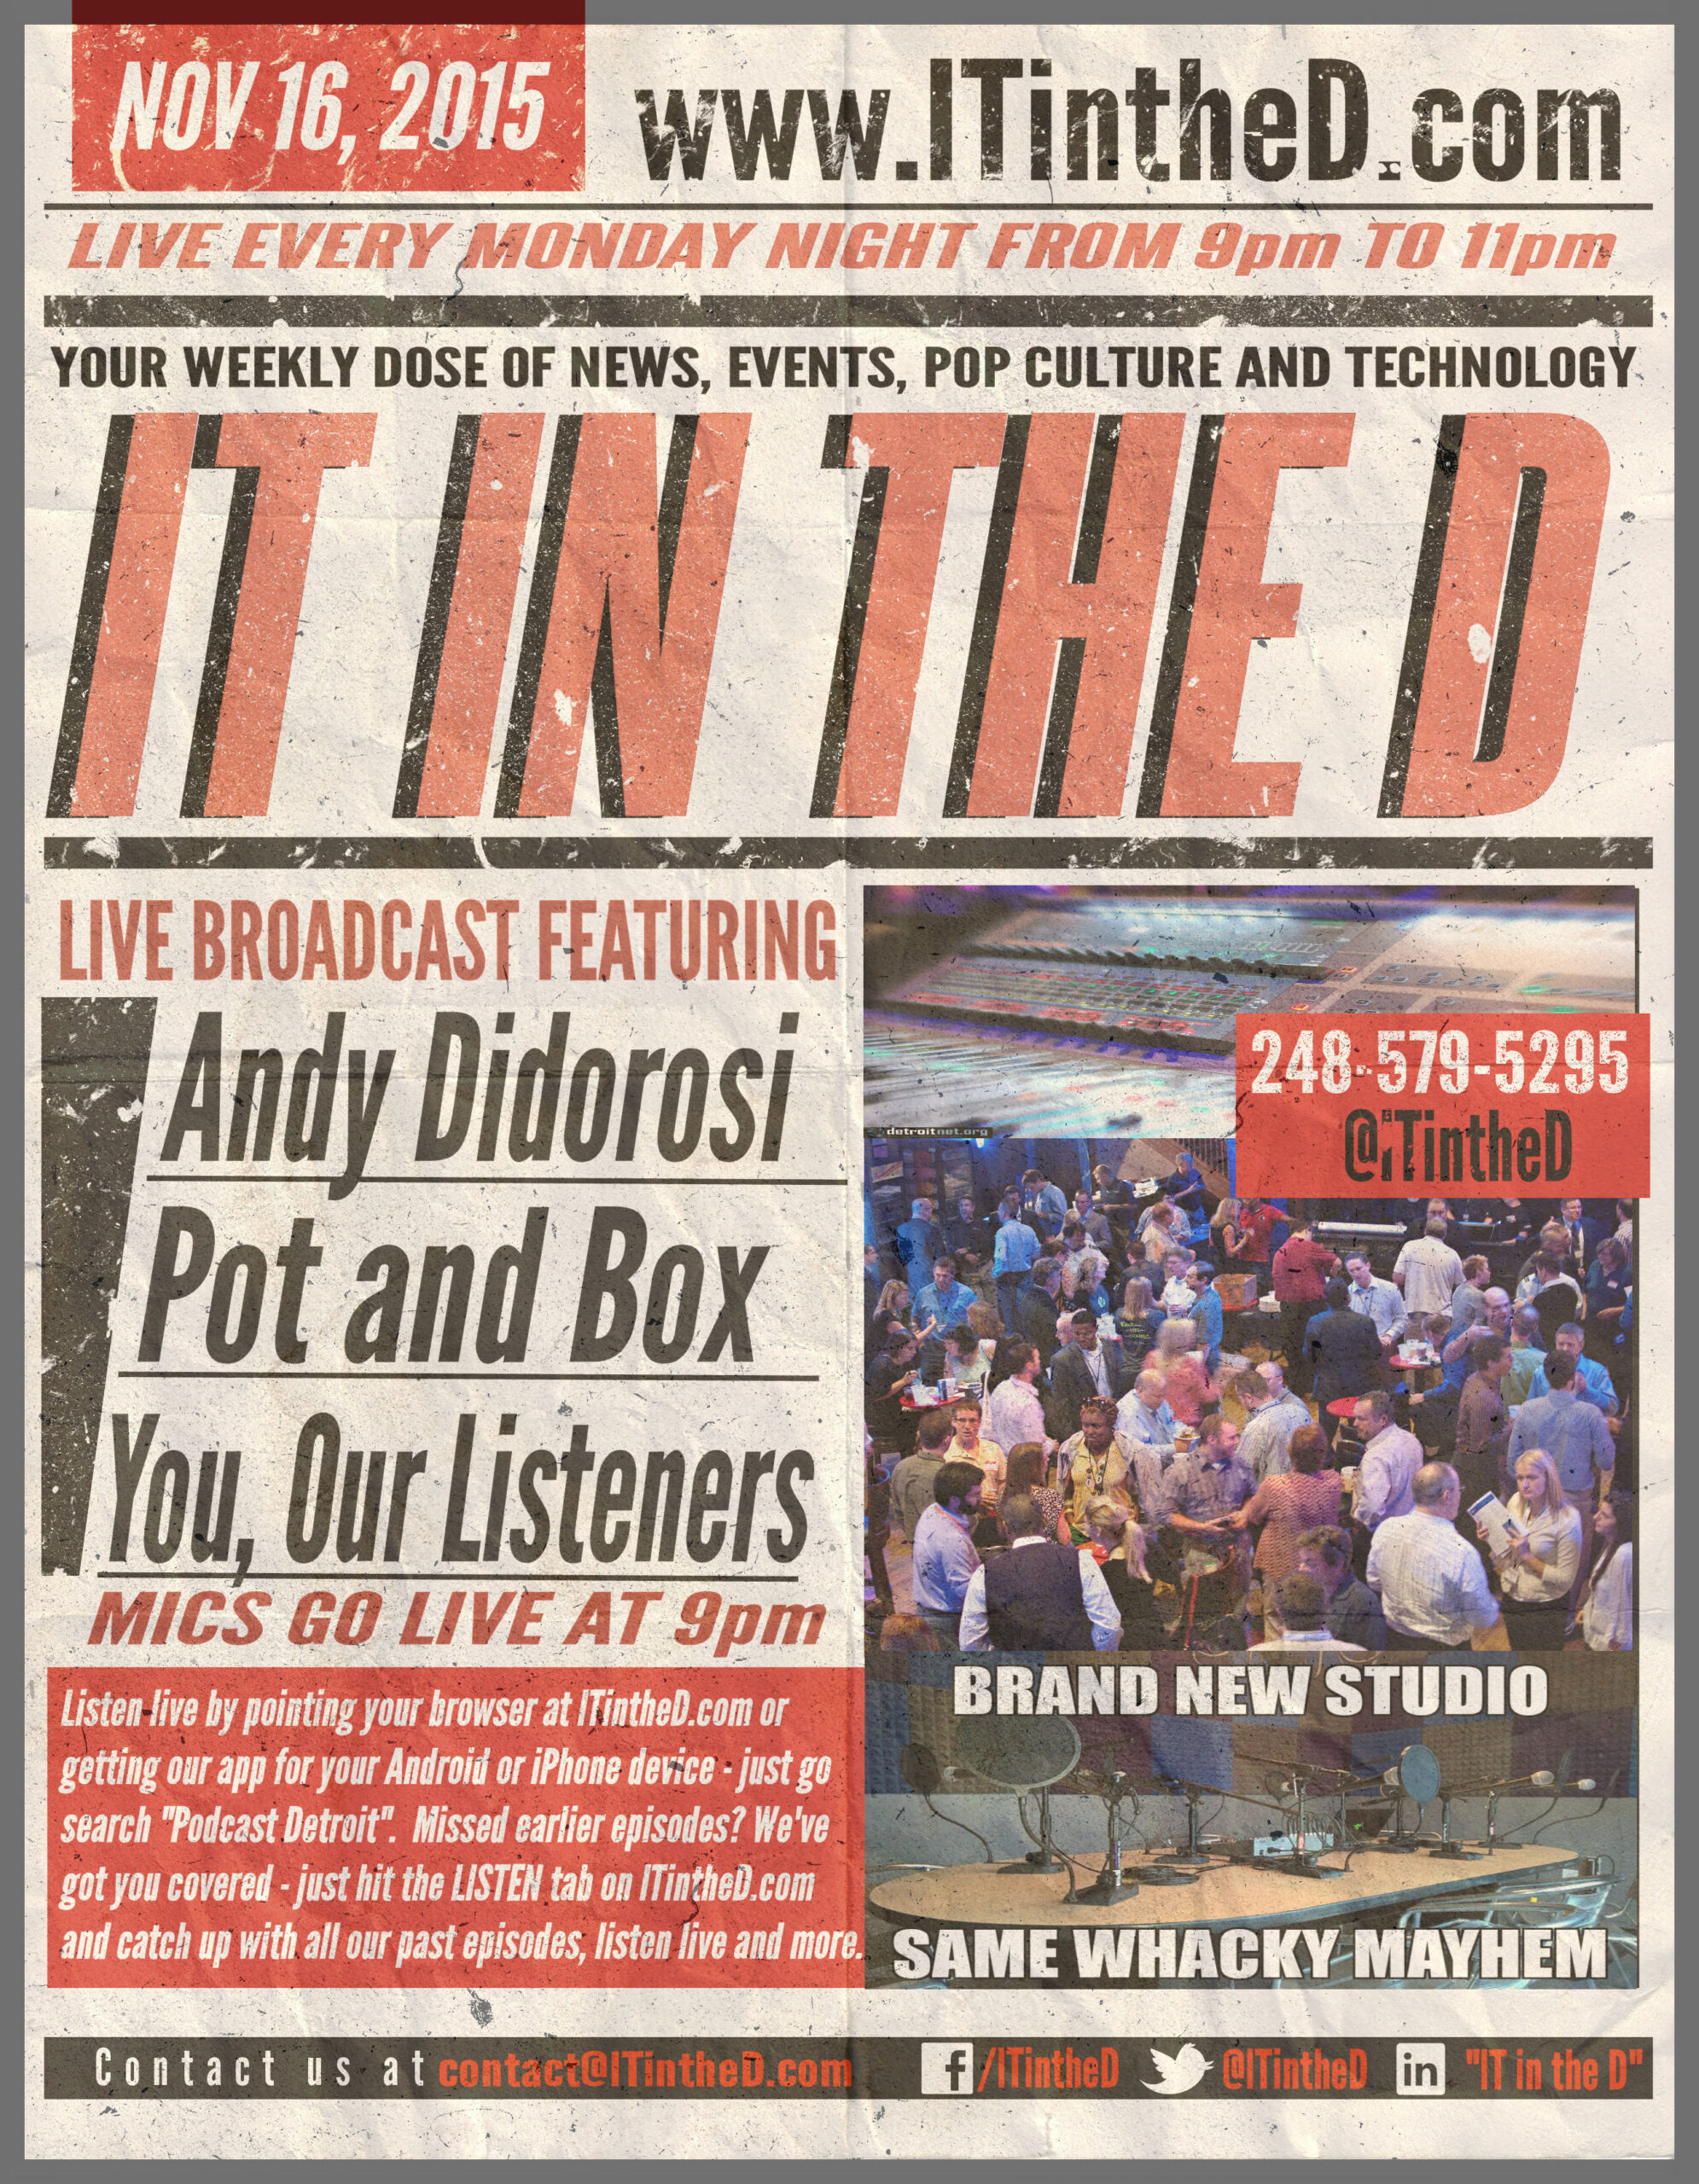 Detroit Bus Company, Pot and Box In-Studio Tonight, Networking Event Thursday and More for 11/16/2015